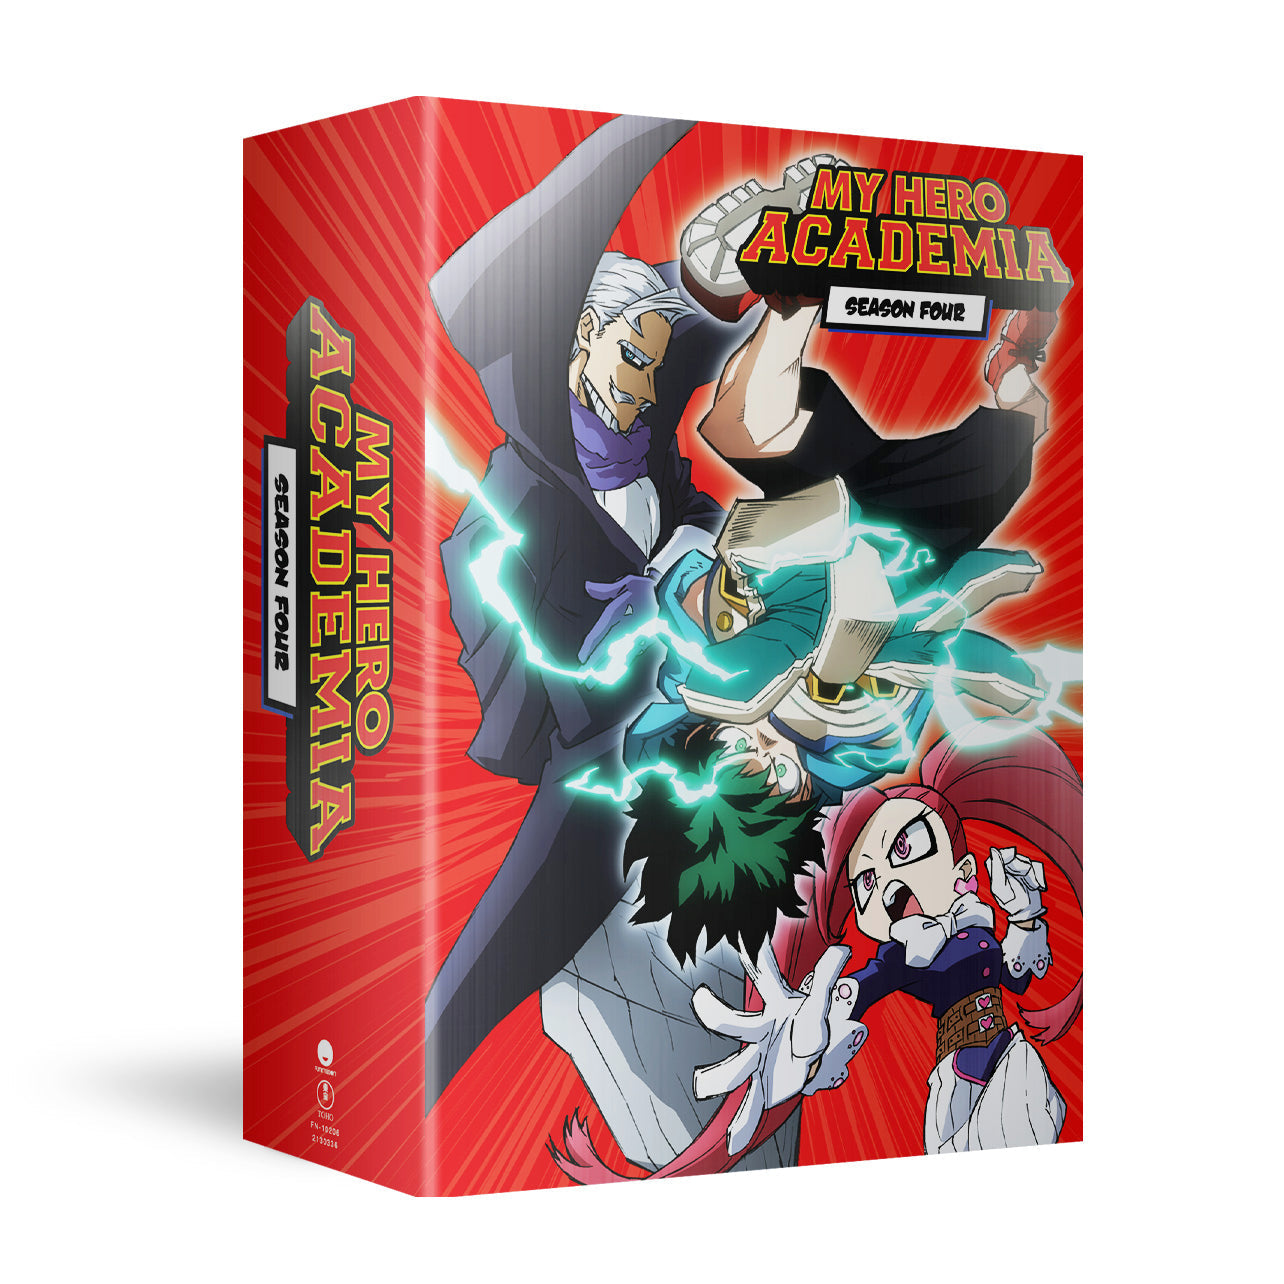 My Hero Academia - Season 4 Part 2 - Limited Edition - Blu-ray + DVD image count 1